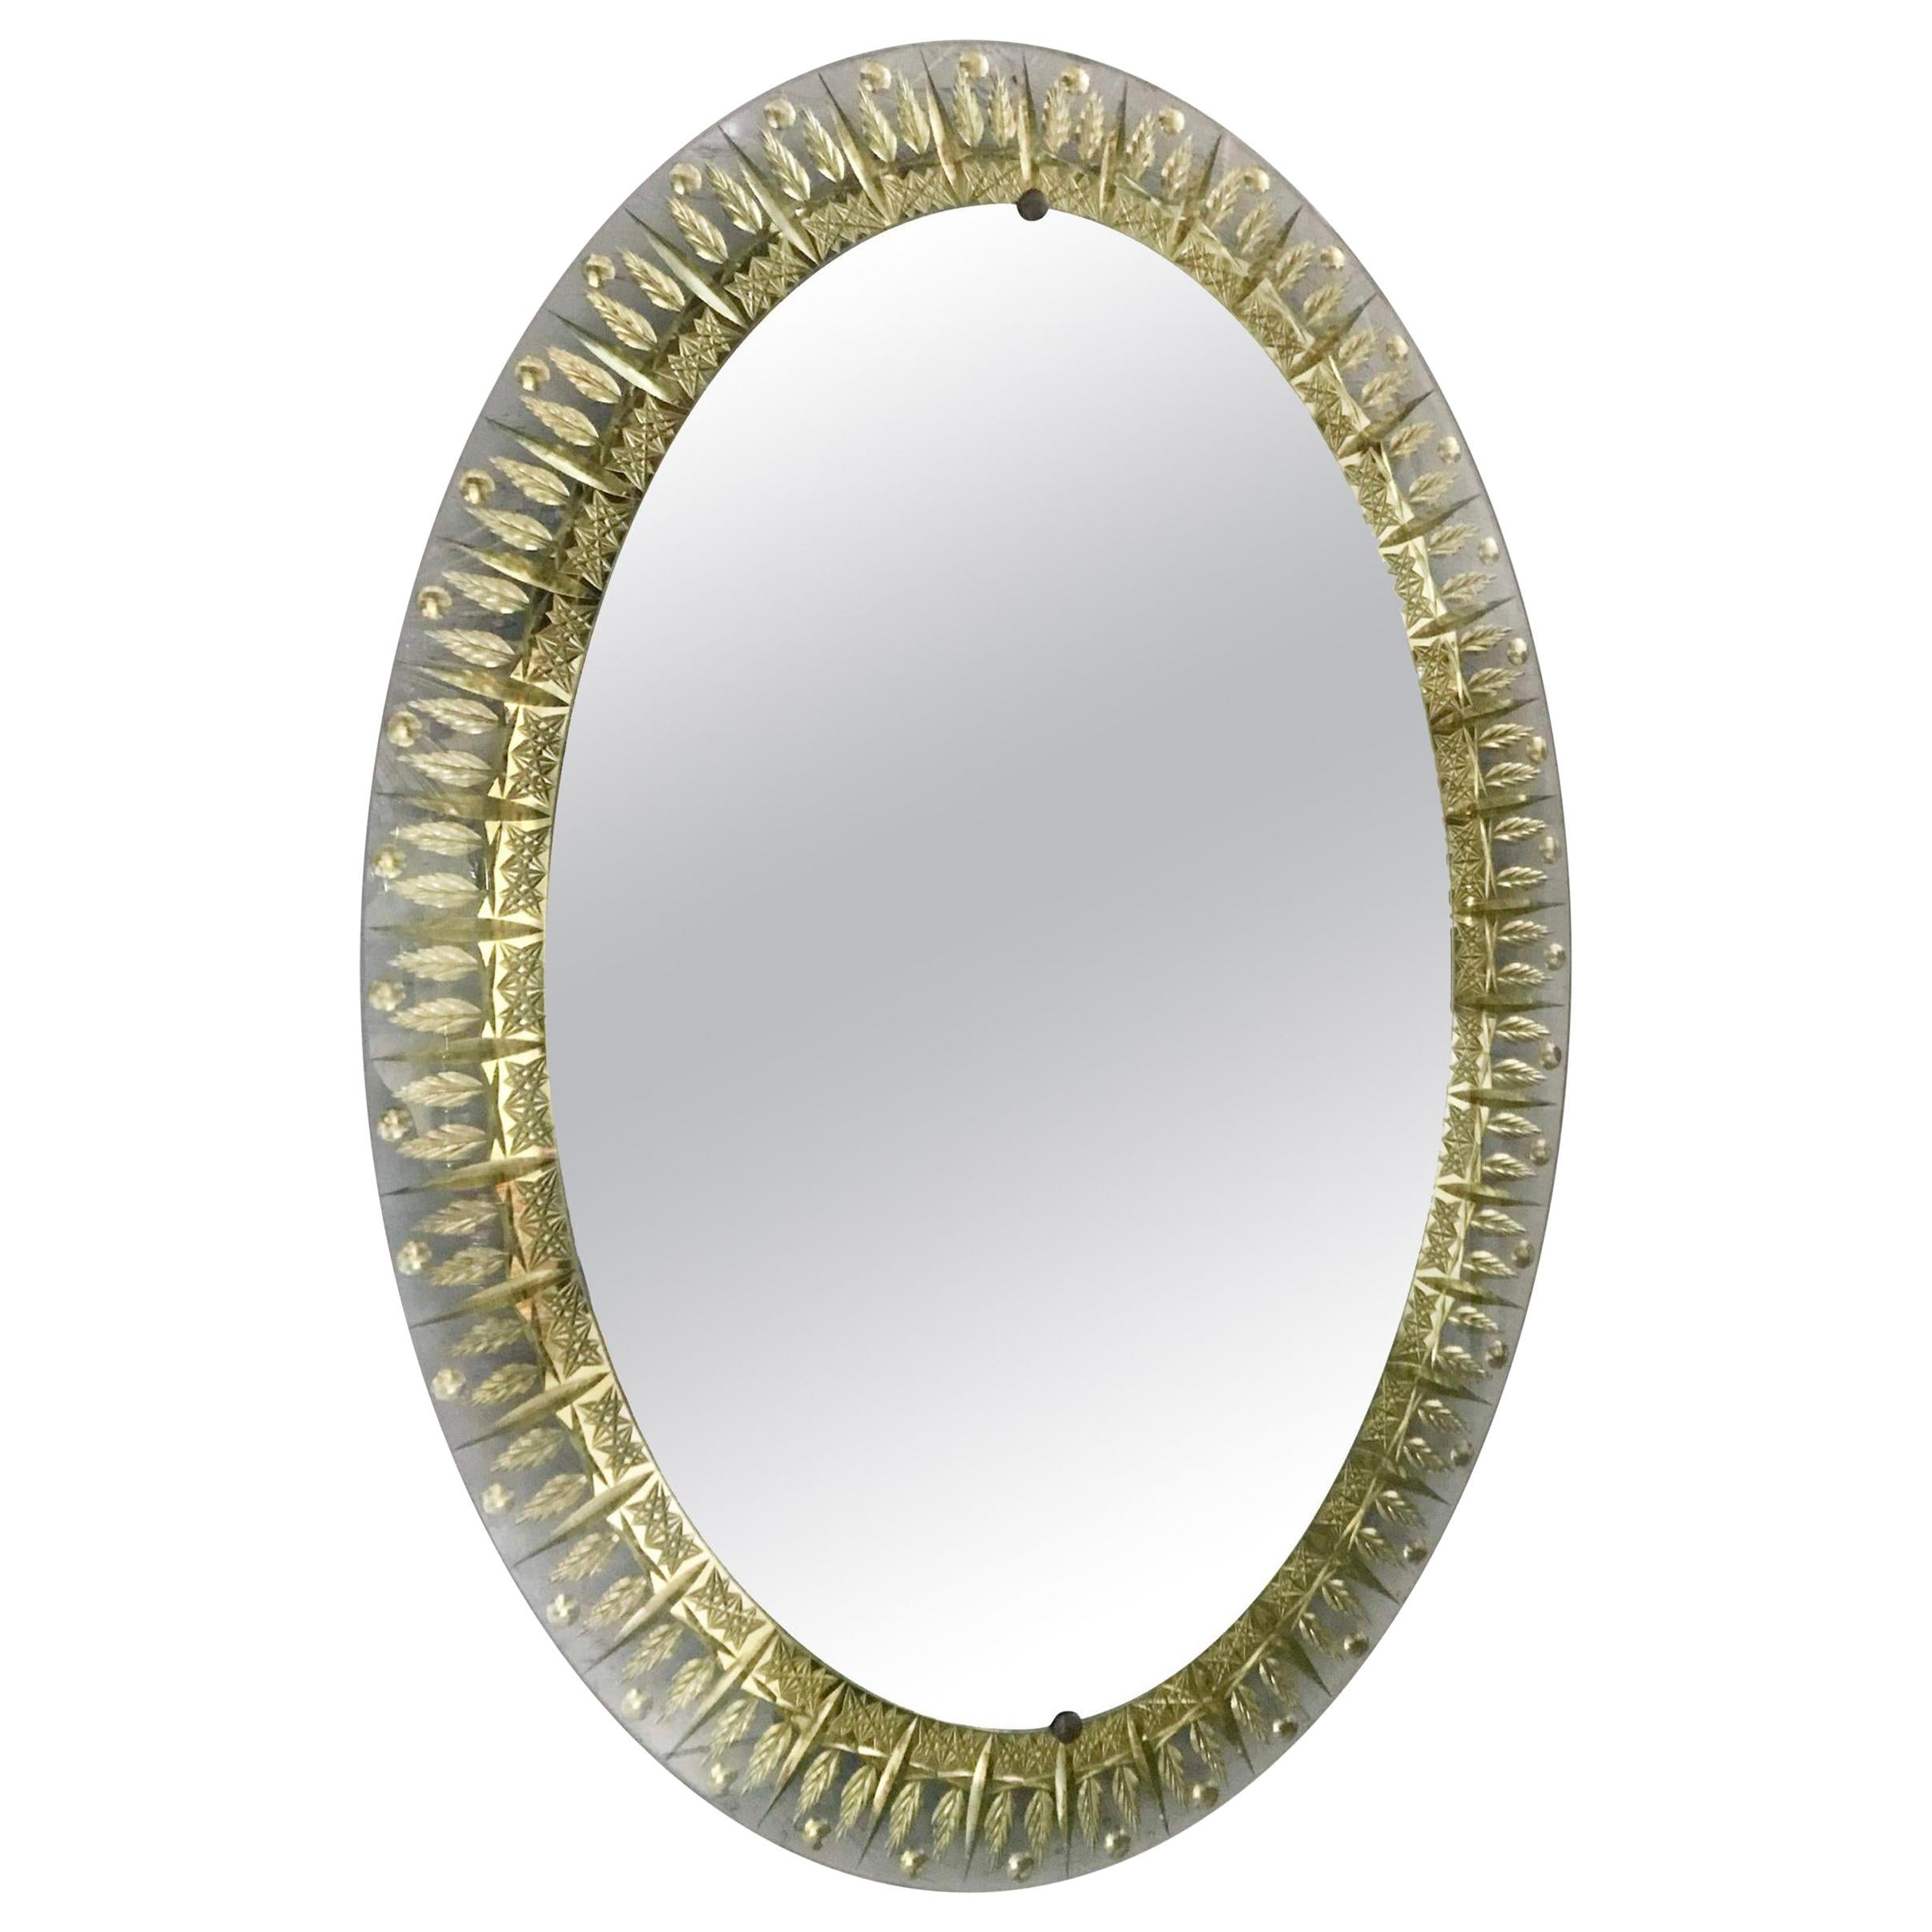 Italian Oval Mirror with Clear Beveled Glass & Gold Leaf Designed, Cristal Arte For Sale